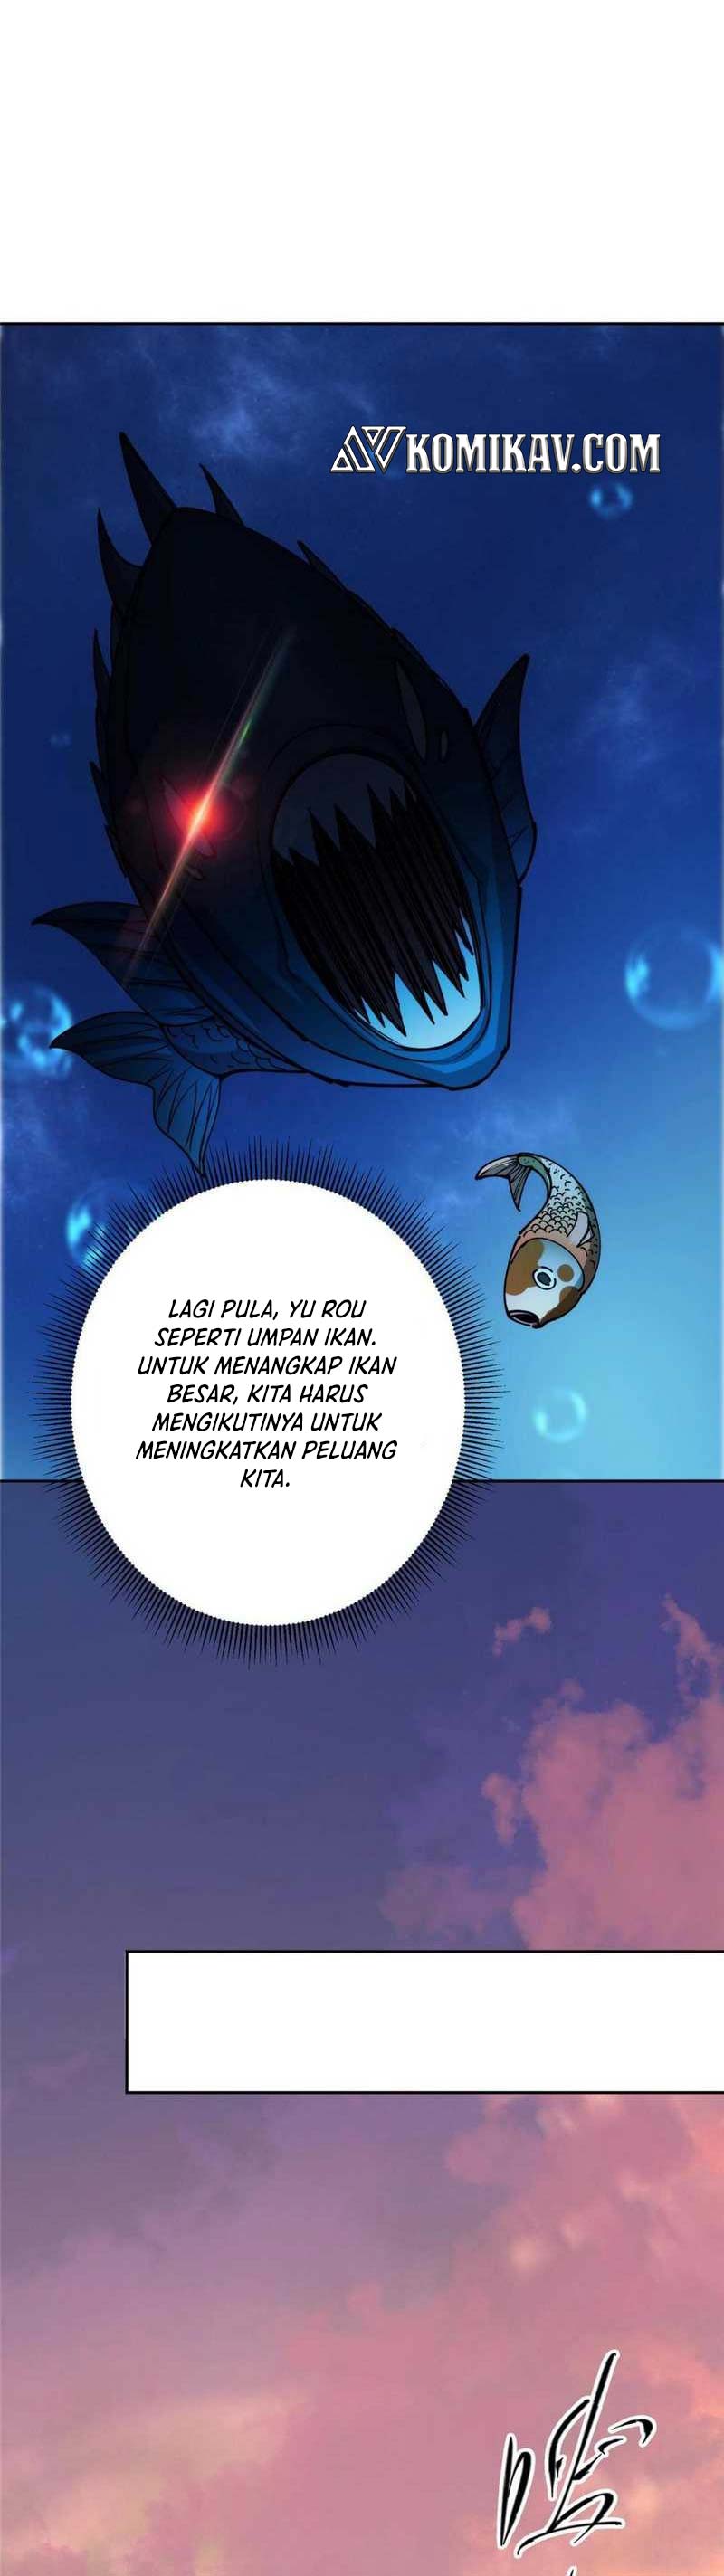 Keep A Low Profile, Sect Leader Chapter 244 Bahasa Indonesia